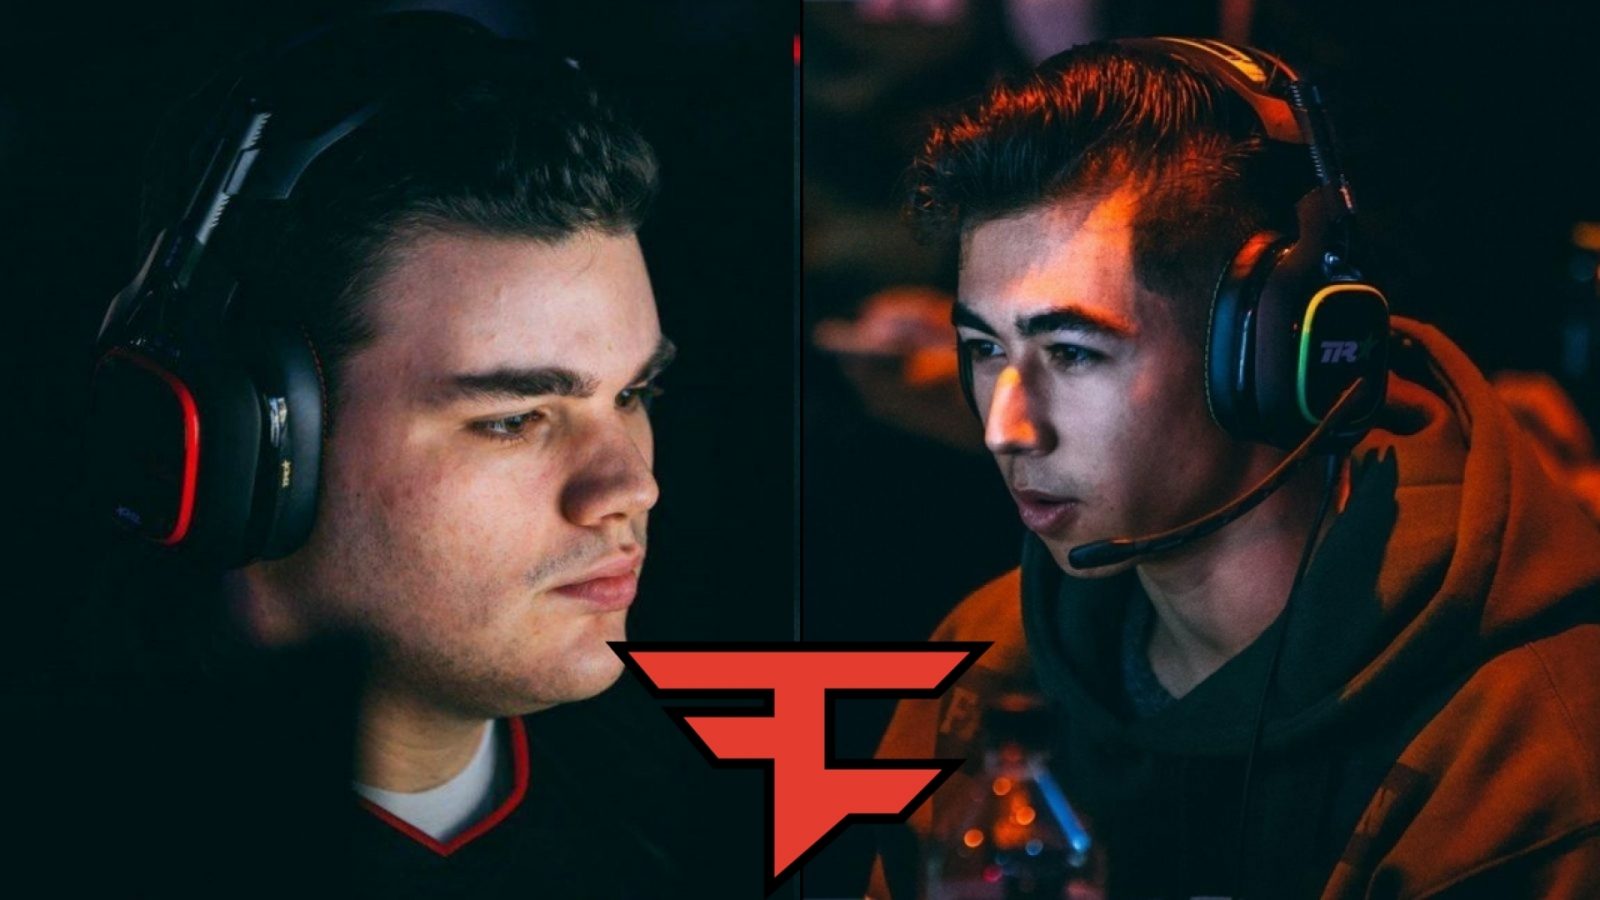 Attach trolls while welcoming him to FaZe Clan - Dexerto